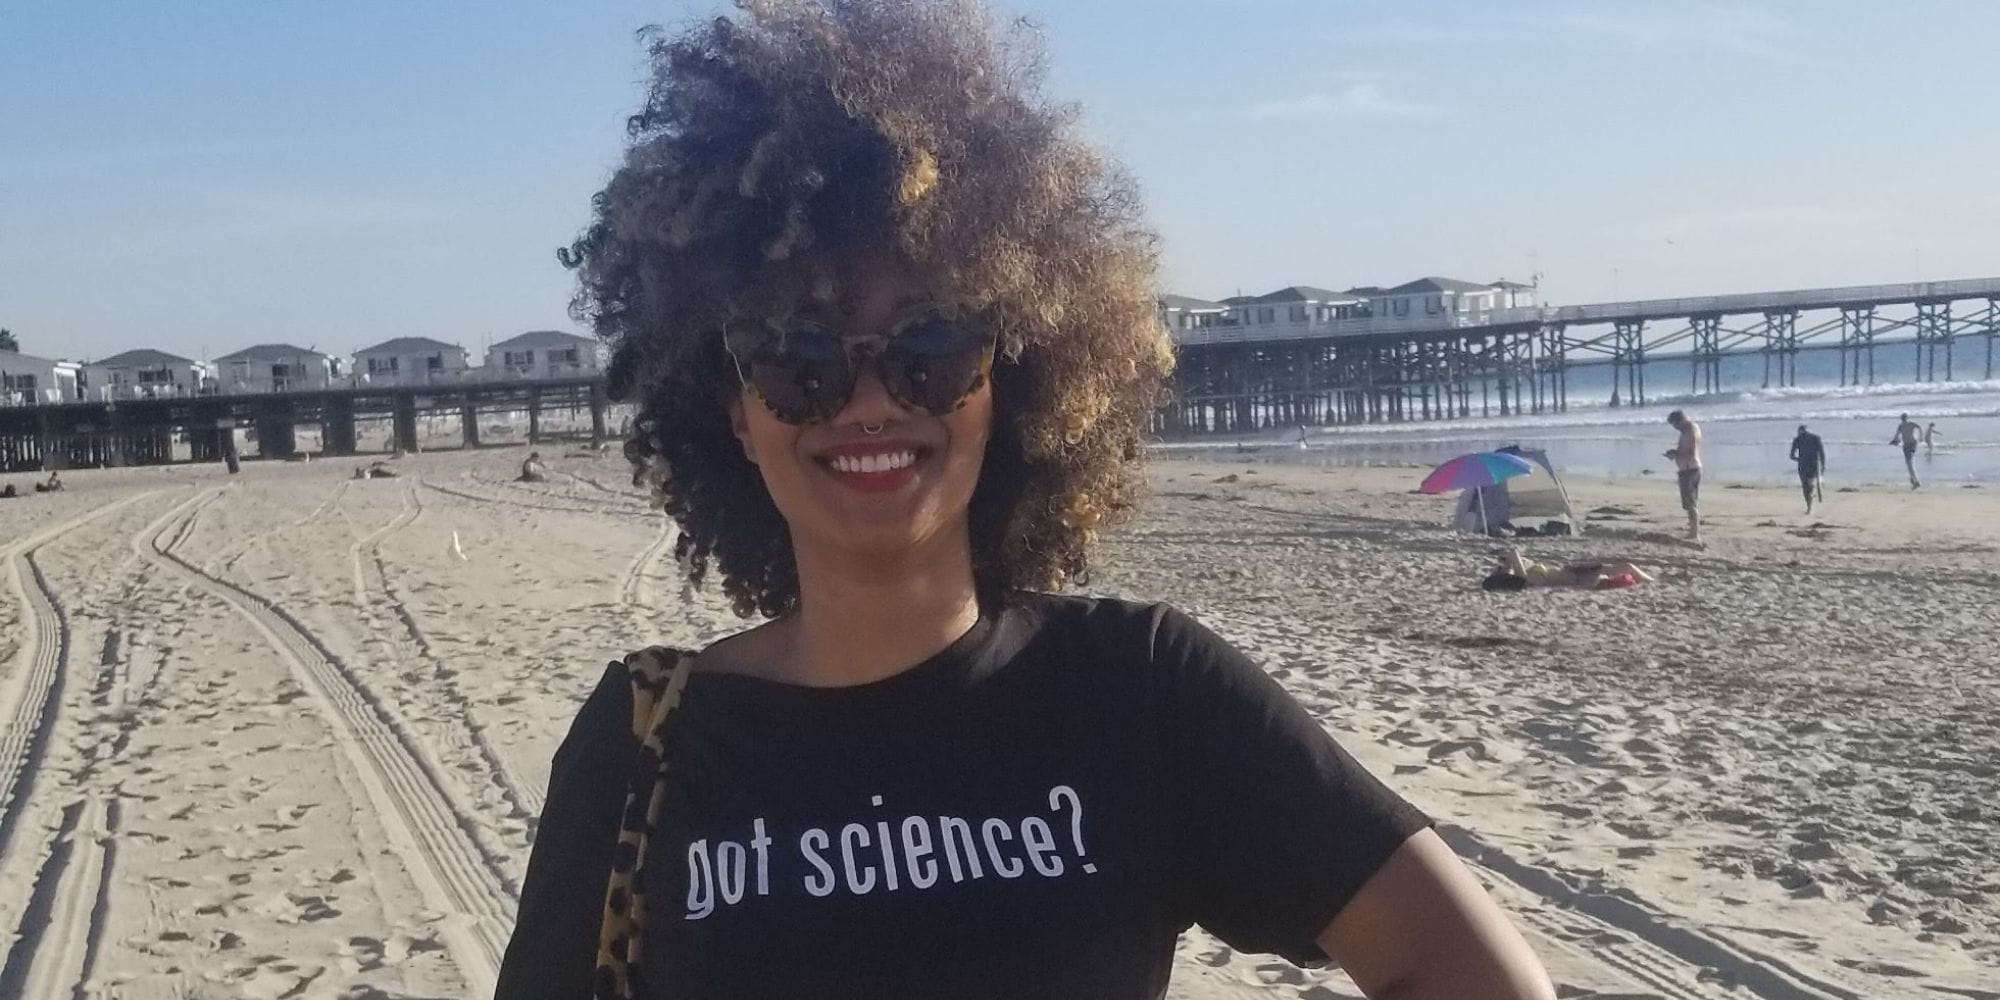 A young woman with brown curly hair stands on a beach. Her shirt reads, "got science?"" _languageinserted="true